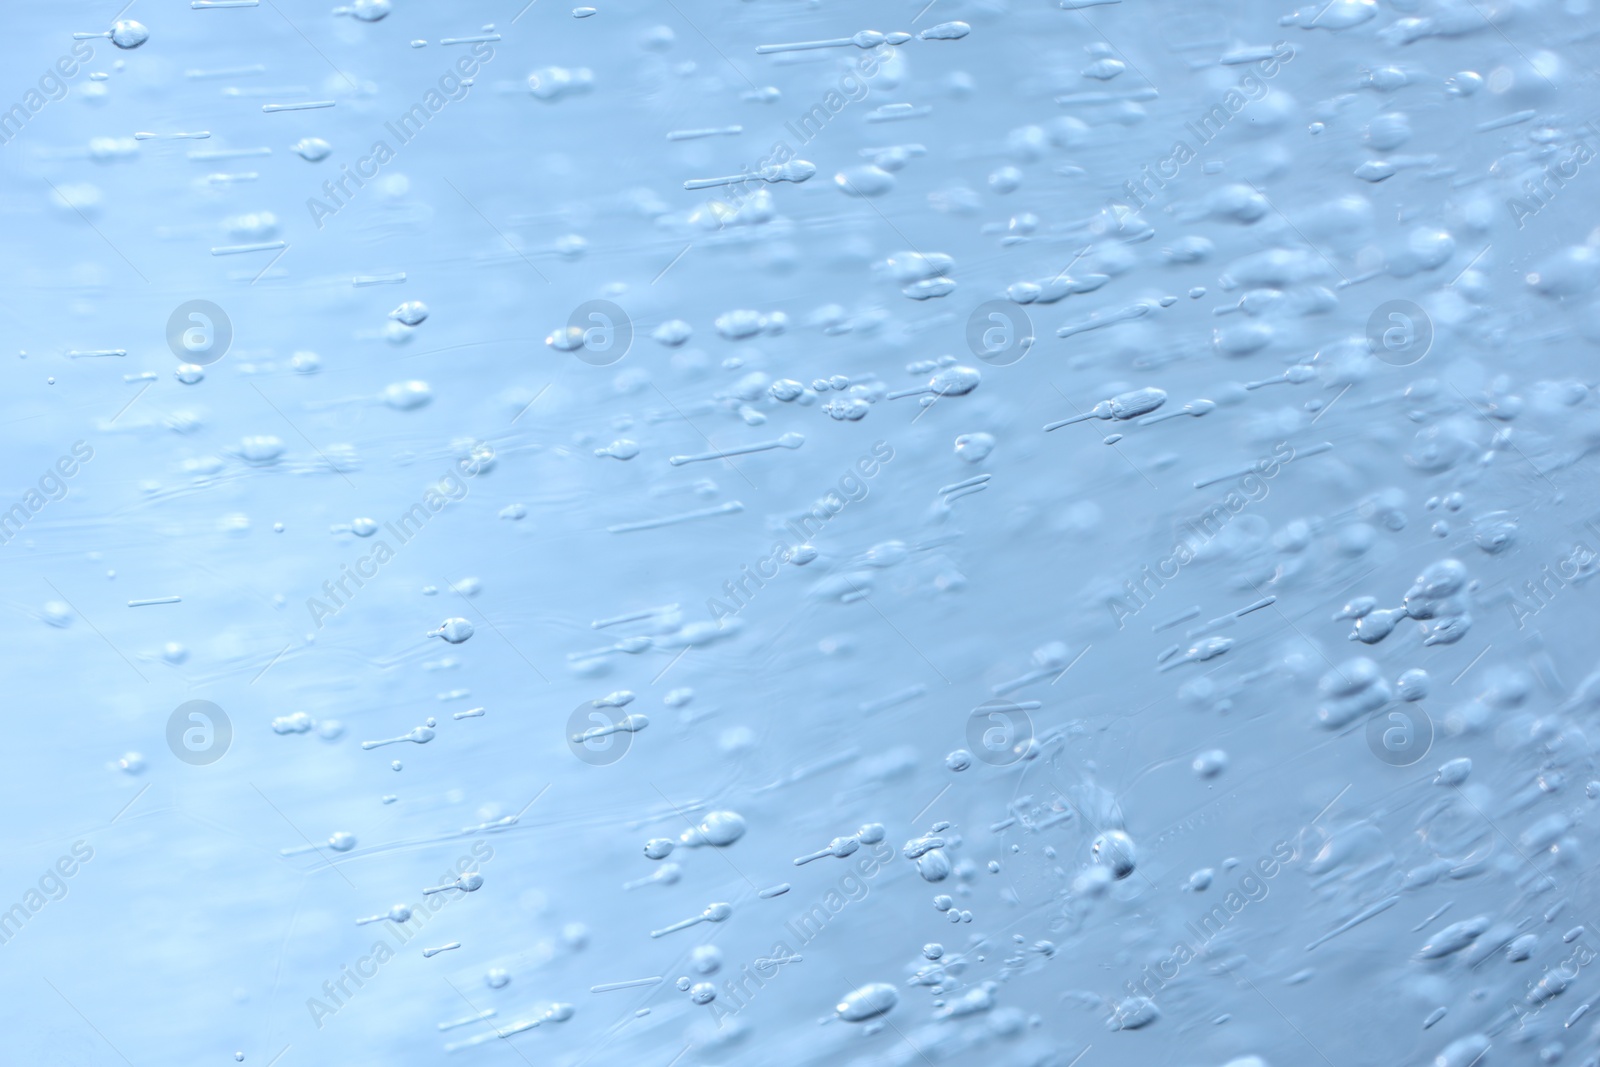 Photo of Texture of ice as background, macro view